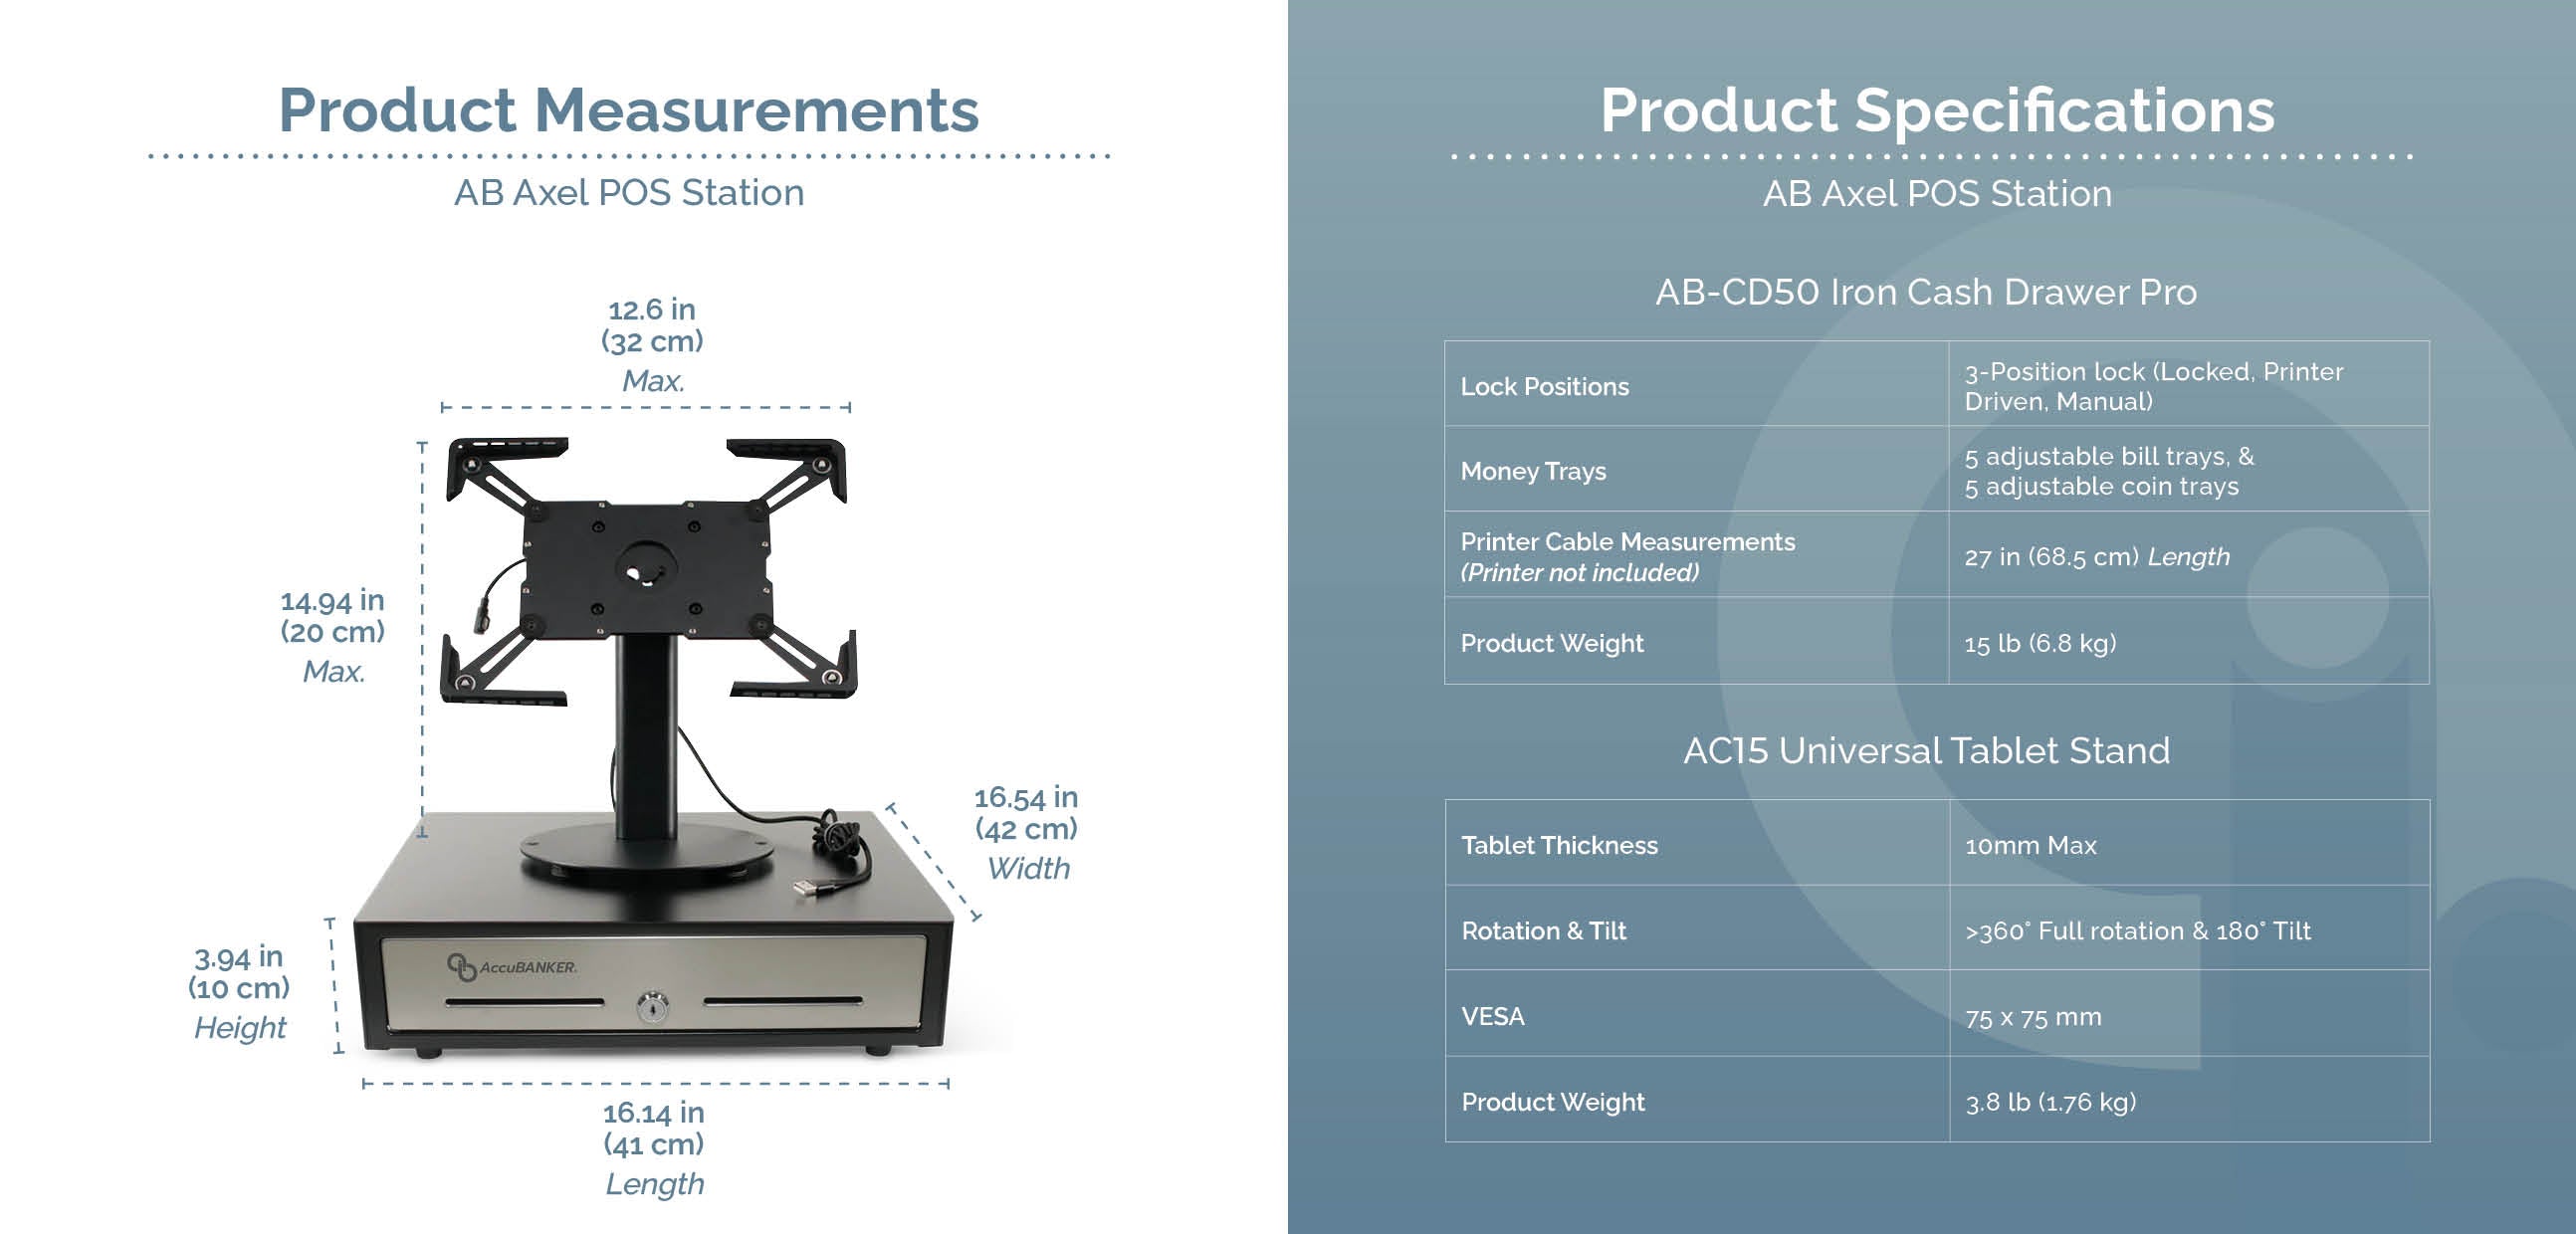 AB Axel POS Station Features & Specifications